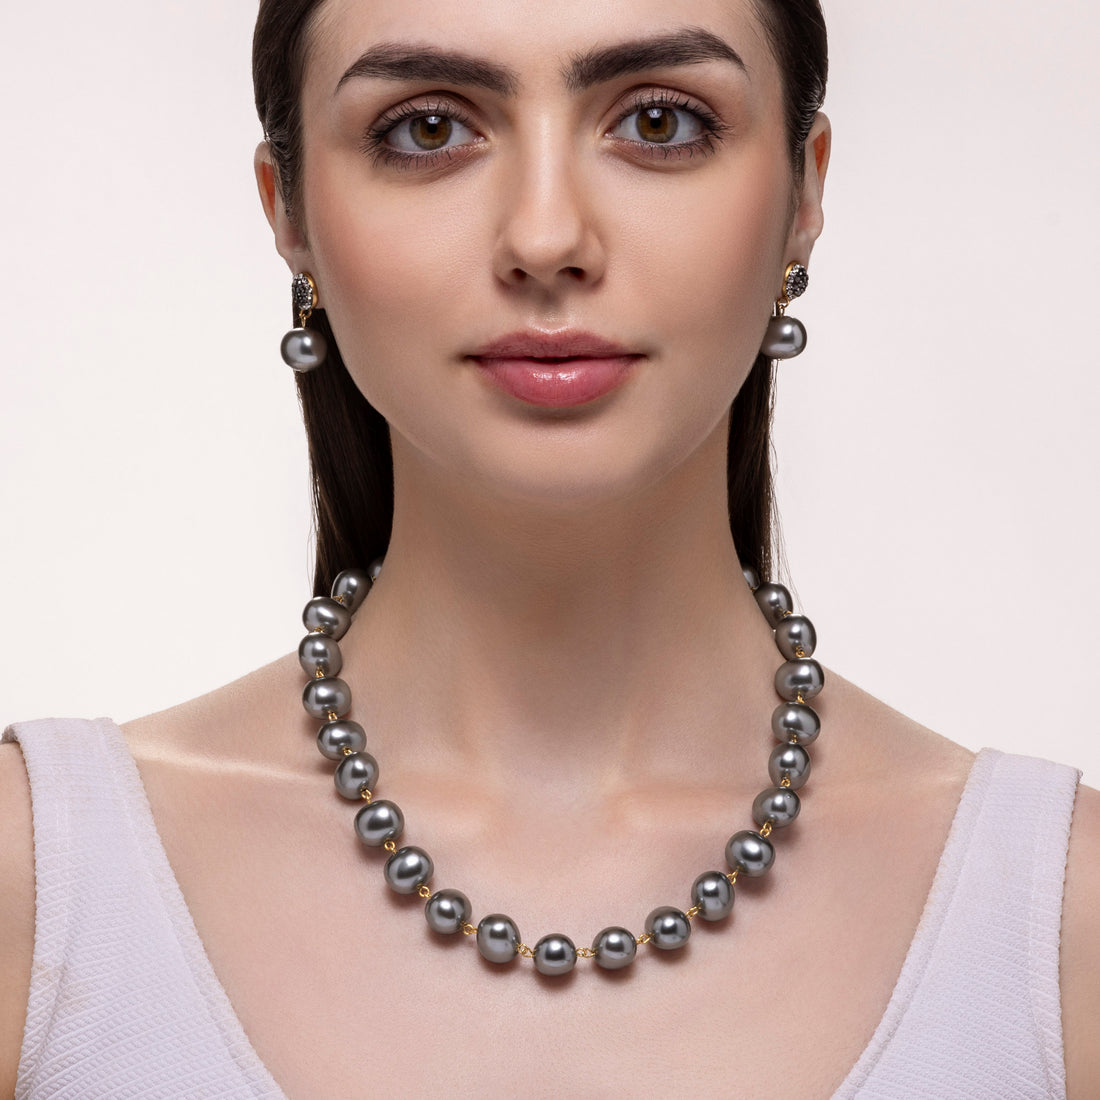 Pearlescent Necklace Set By PRAO